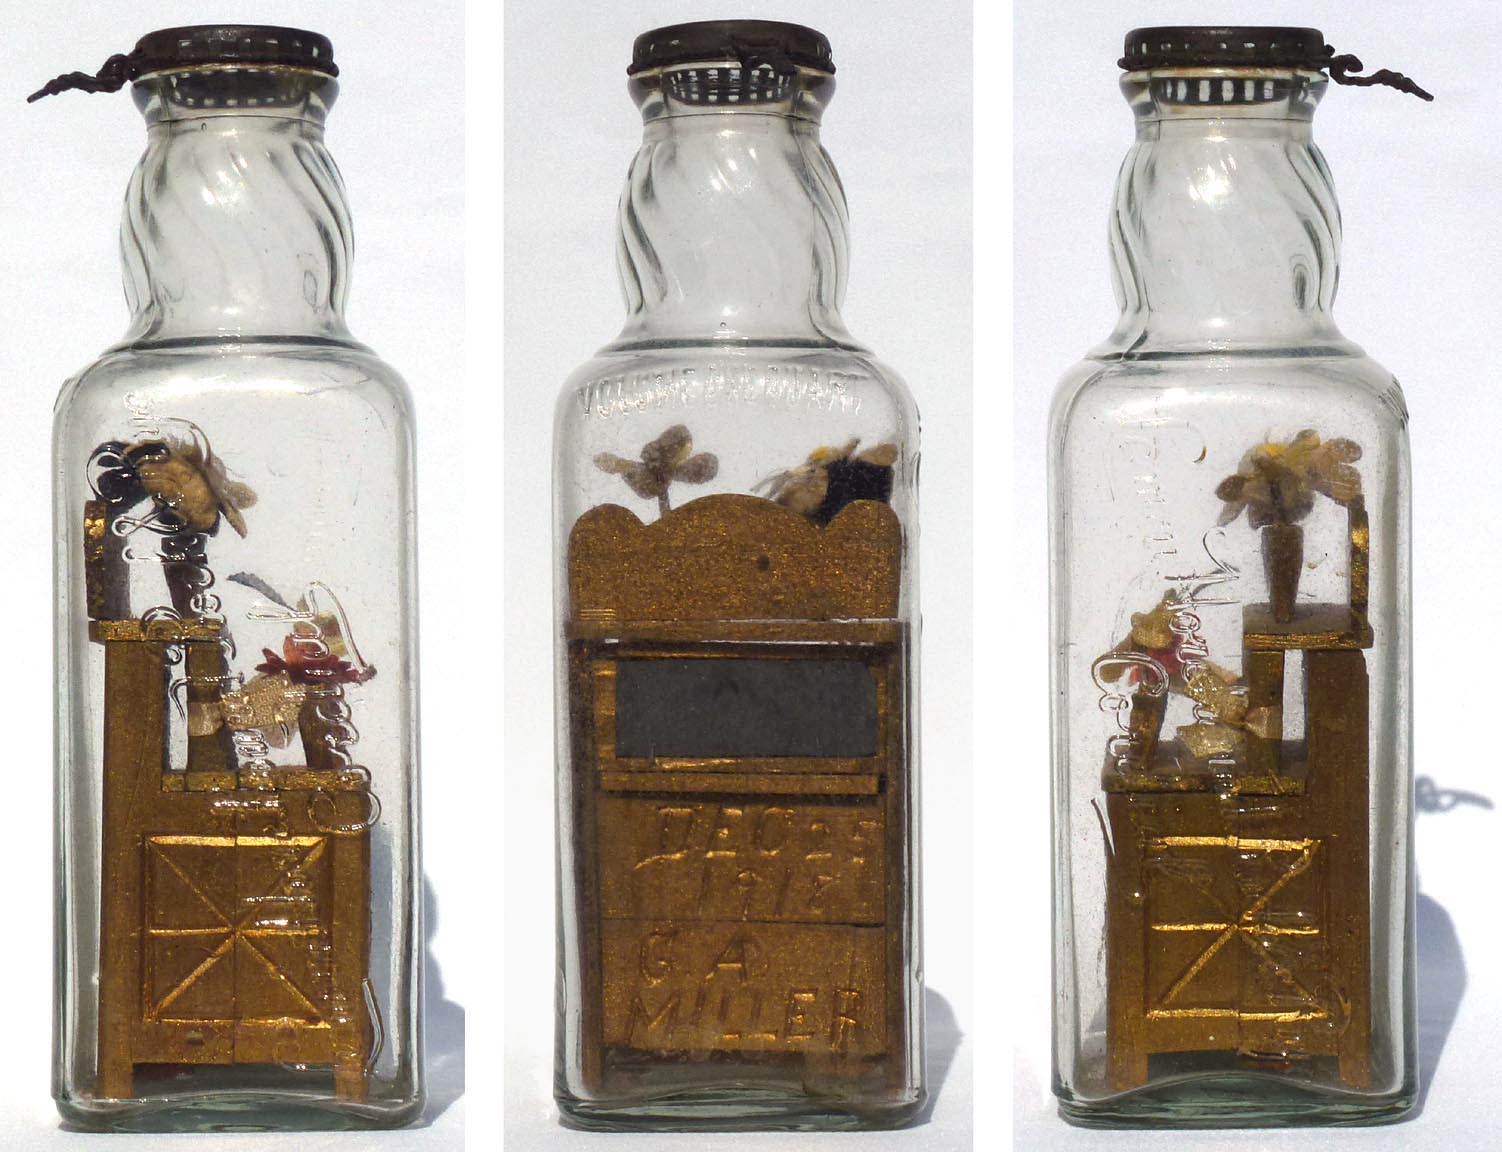 Dresser in bottle whimsy - one of a pair